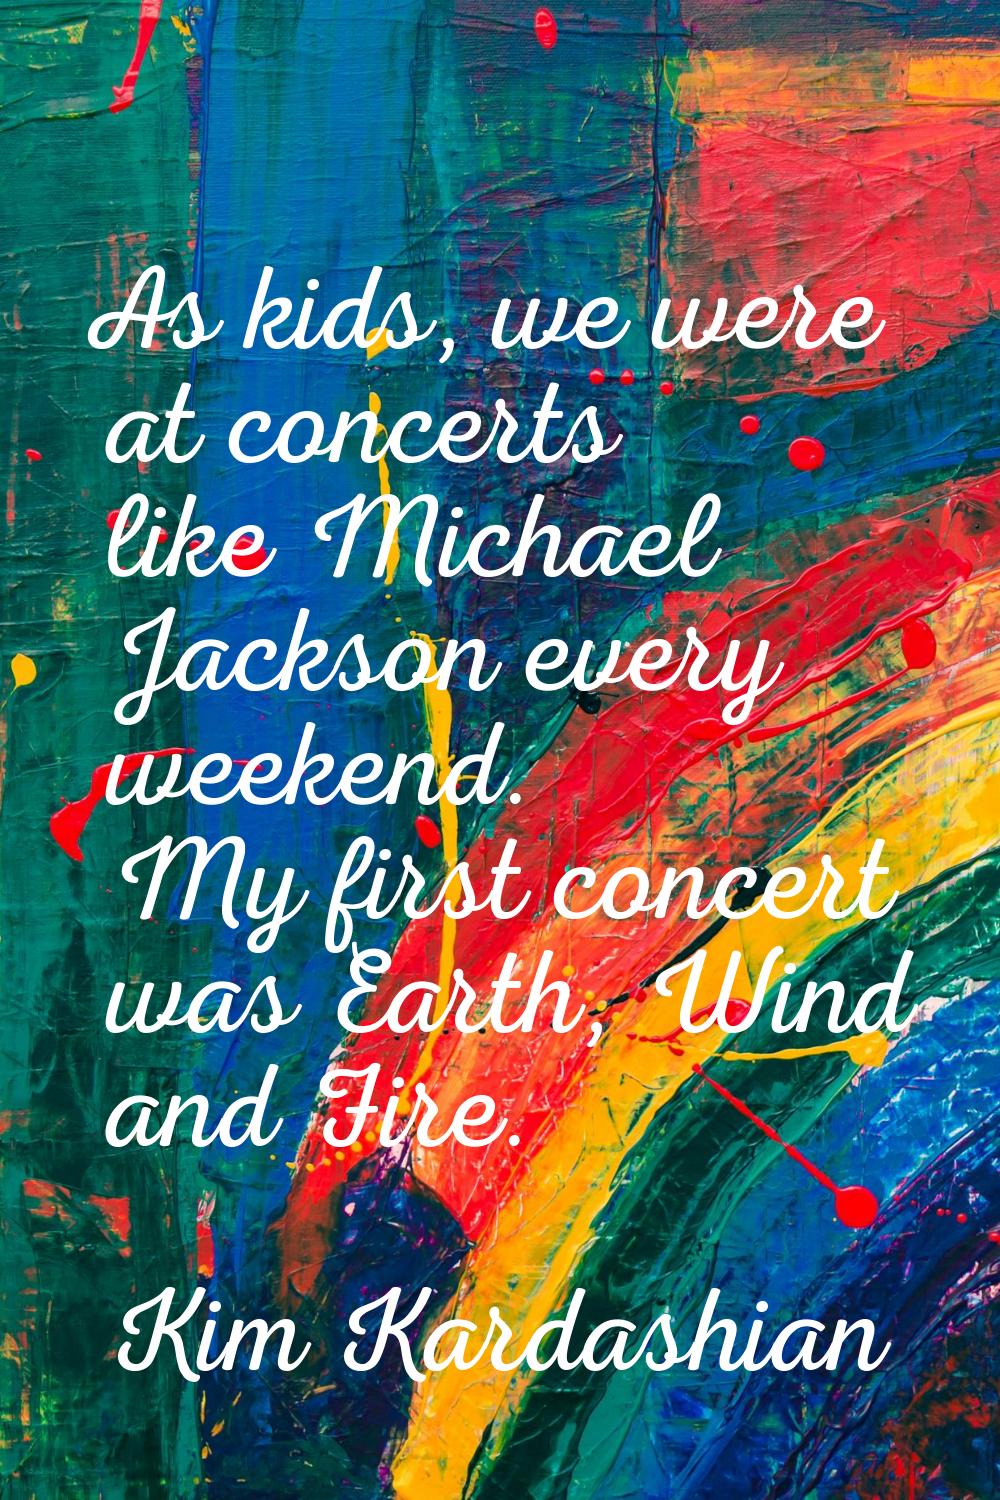 As kids, we were at concerts like Michael Jackson every weekend. My first concert was Earth, Wind a